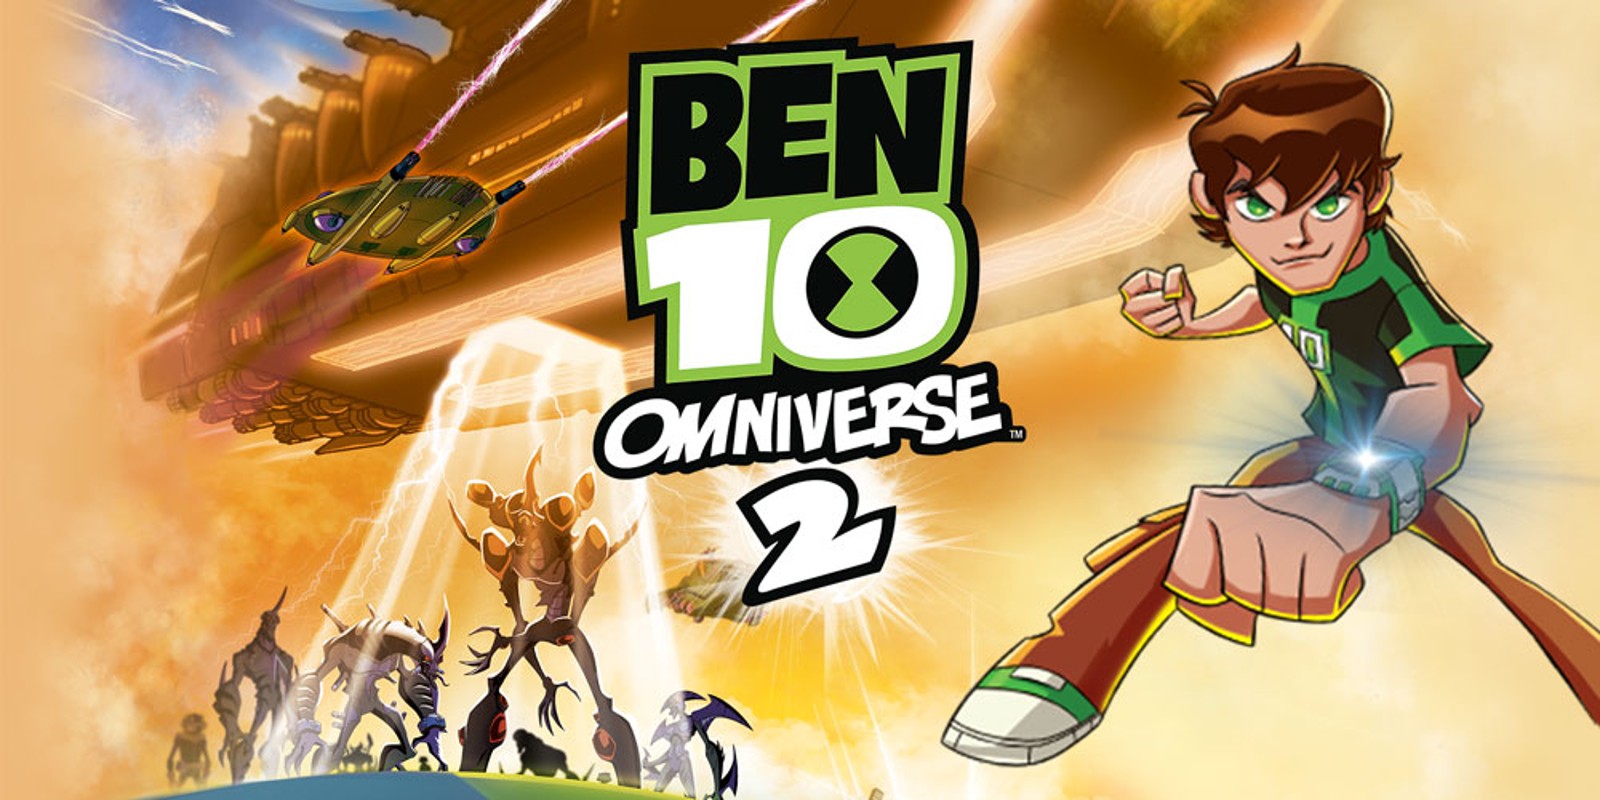 Ben 10 Omniverse 2 Game Free Download For Ppsspp